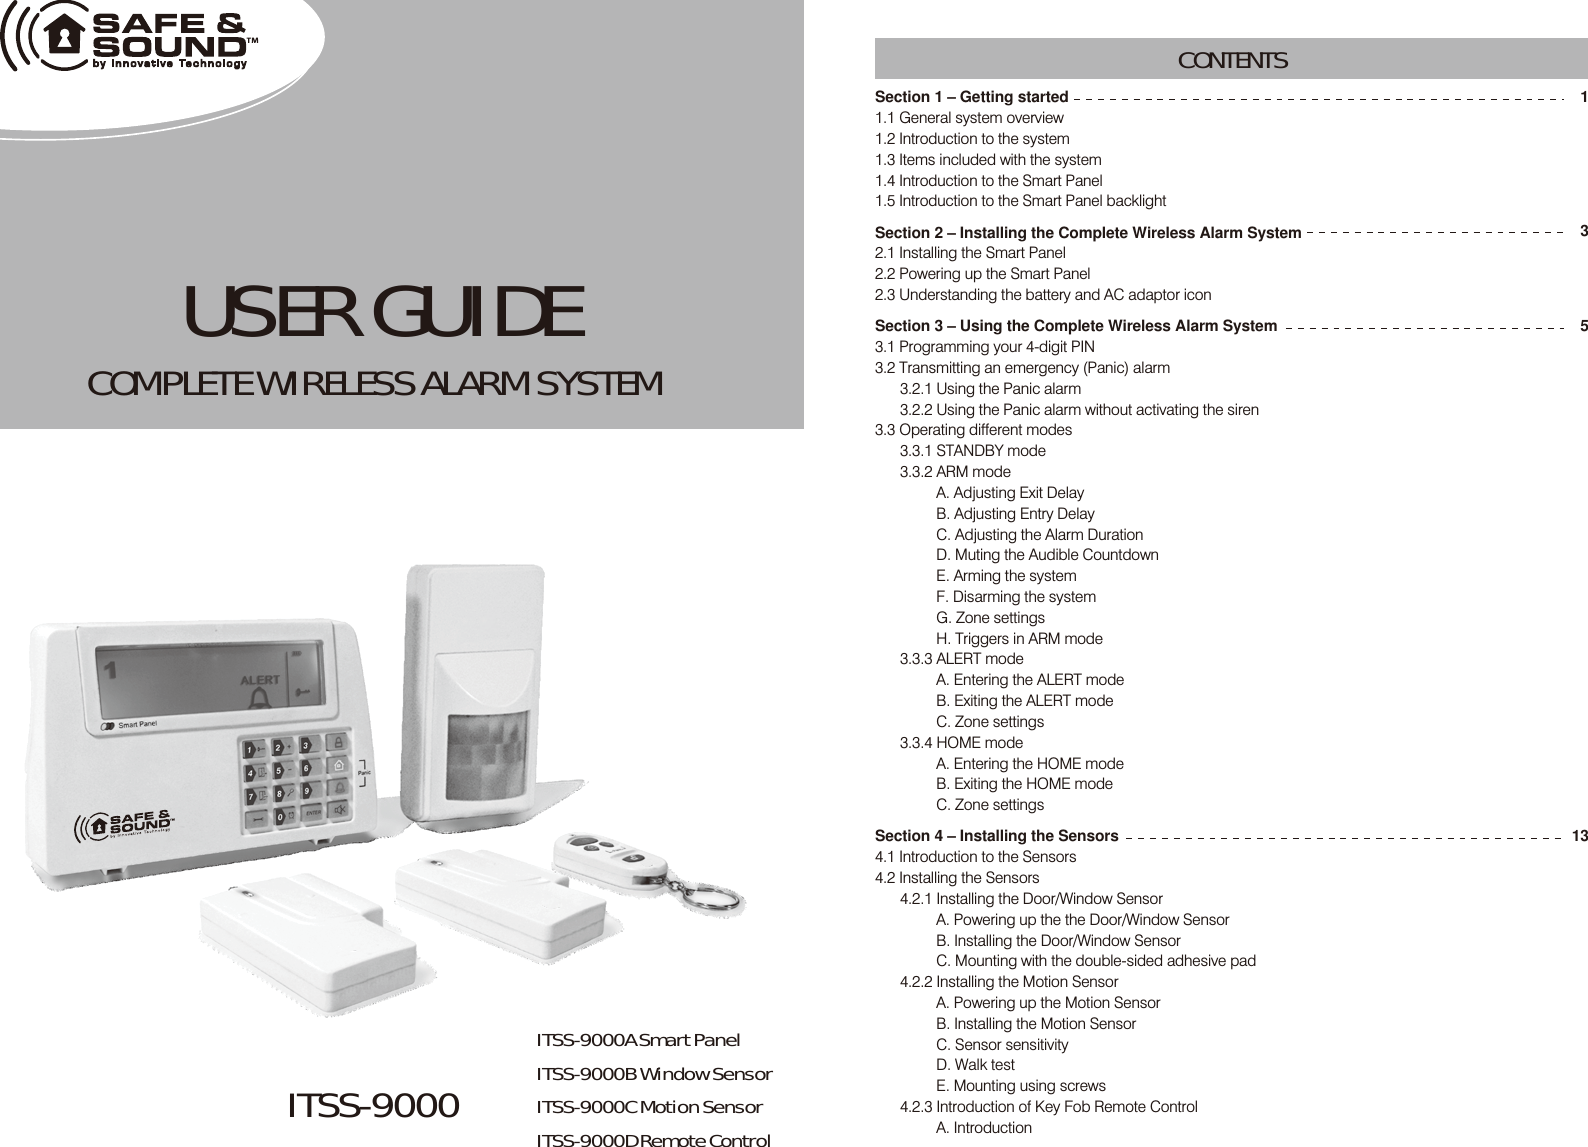 ITSS-9000 USER GUIDECOMPLETE WIRELESS ALARM SYSTEM Section 1 – Getting started1.1 General system overview1.2 Introduction to the system1.3 Items included with the system1.4 Introduction to the Smart Panel 1.5 Introduction to the Smart Panel backlightSection 2 – Installing the Complete Wireless Alarm System2.1 Installing the Smart Panel 2.2 Powering up the Smart Panel 2.3 Understanding the battery and AC adaptor iconSection 3 – Using the Complete Wireless Alarm System3.1 Programming your 4-digit PIN3.2 Transmitting an emergency (Panic) alarm3.2.1 Using the Panic alarm 3.2.2 Using the Panic alarm without activating the siren3.3 Operating different modes 3.3.1 STANDBY mode3.3.2 ARM modeA. Adjusting Exit DelayB. Adjusting Entry DelayC. Adjusting the Alarm DurationD. Muting the Audible CountdownE. Arming the systemF. Disarming the systemG. Zone settingsH. Triggers in ARM mode3.3.3 ALERT modeA. Entering the ALERT modeB. Exiting the ALERT modeC. Zone settings3.3.4 HOME modeA. Entering the HOME modeB. Exiting the HOME modeC. Zone settings Section 4 – Installing the Sensors4.1 Introduction to the Sensors 4.2 Installing the Sensors4.2.1 Installing the Door/Window SensorA. Powering up the the Door/Window SensorB. Installing the Door/Window SensorC. Mounting with the double-sided adhesive pad4.2.2 Installing the Motion Sensor A. Powering up the Motion Sensor B. Installing the Motion SensorC. Sensor sensitivity D. Walk testE. Mounting using screws4.2.3 Introduction of Key Fob Remote ControlA. IntroductionCONTENTS13513ITSS-9000A Smart PanelITSS-9000B Window SensorITSS-9000C Motion SensorITSS-9000D Remote Control